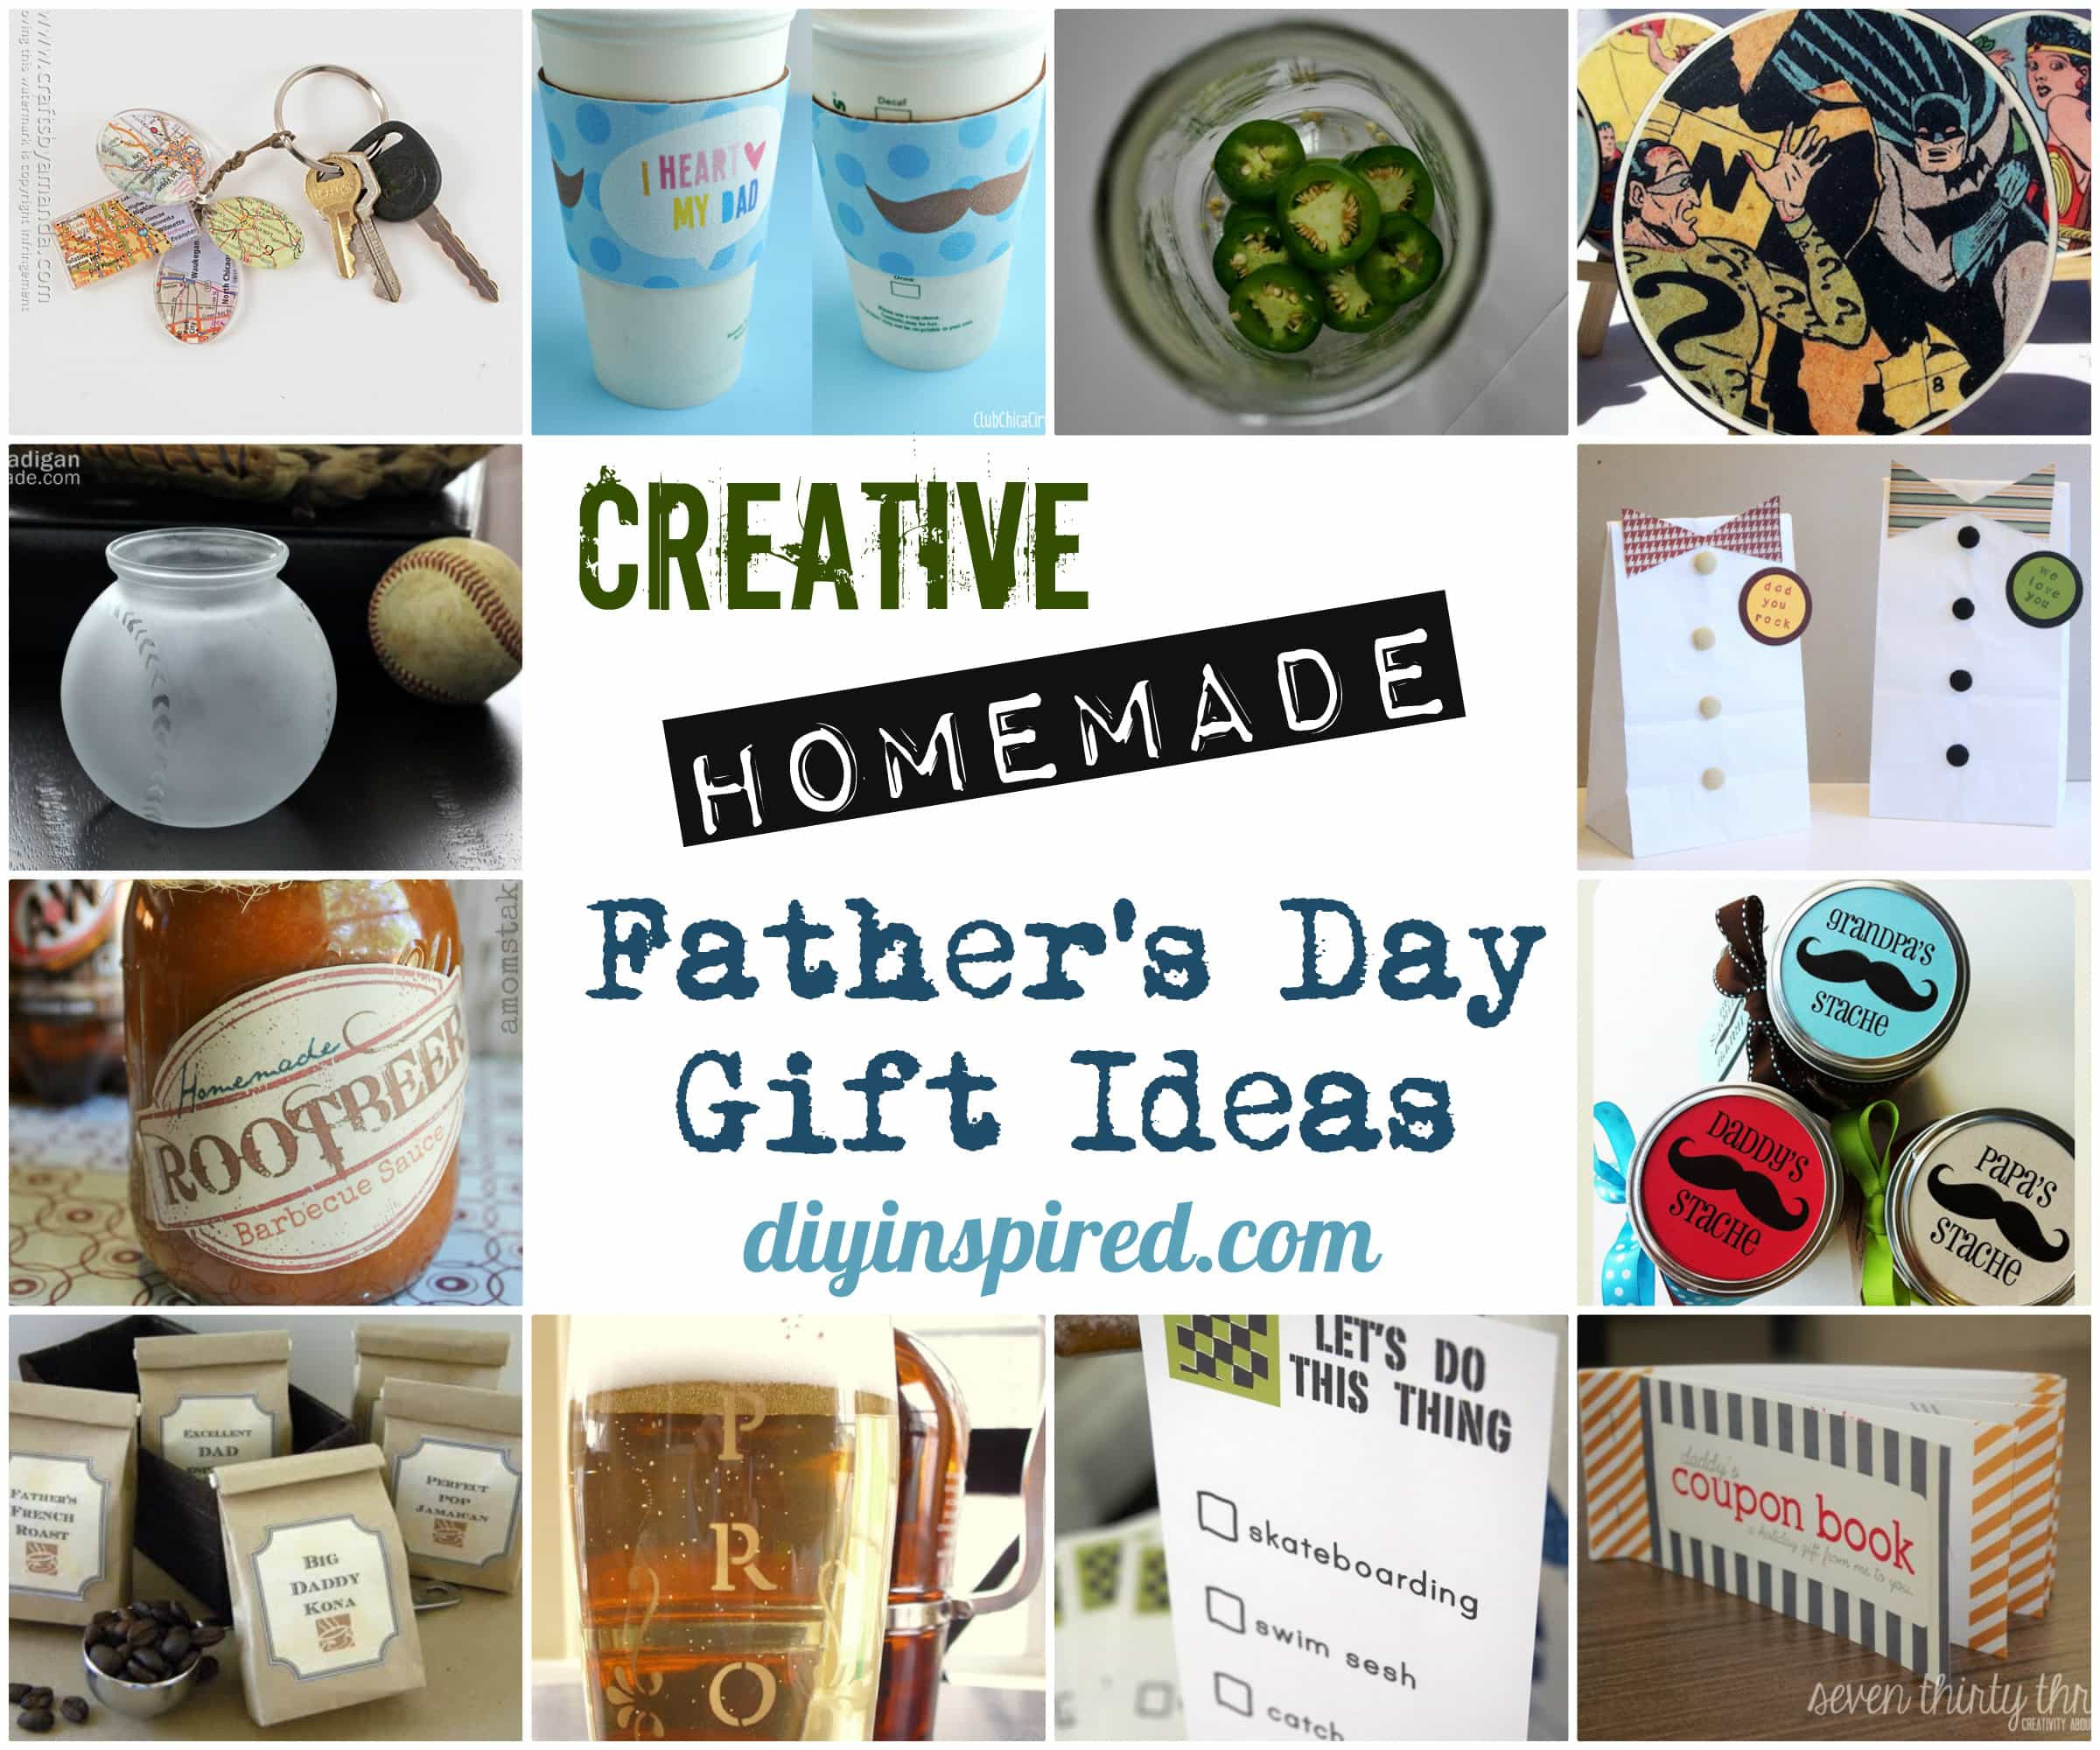 Homemade Fathers Day Gifts Ideas
 Creative Homemade Father’s Day Gift Ideas DIY Inspired